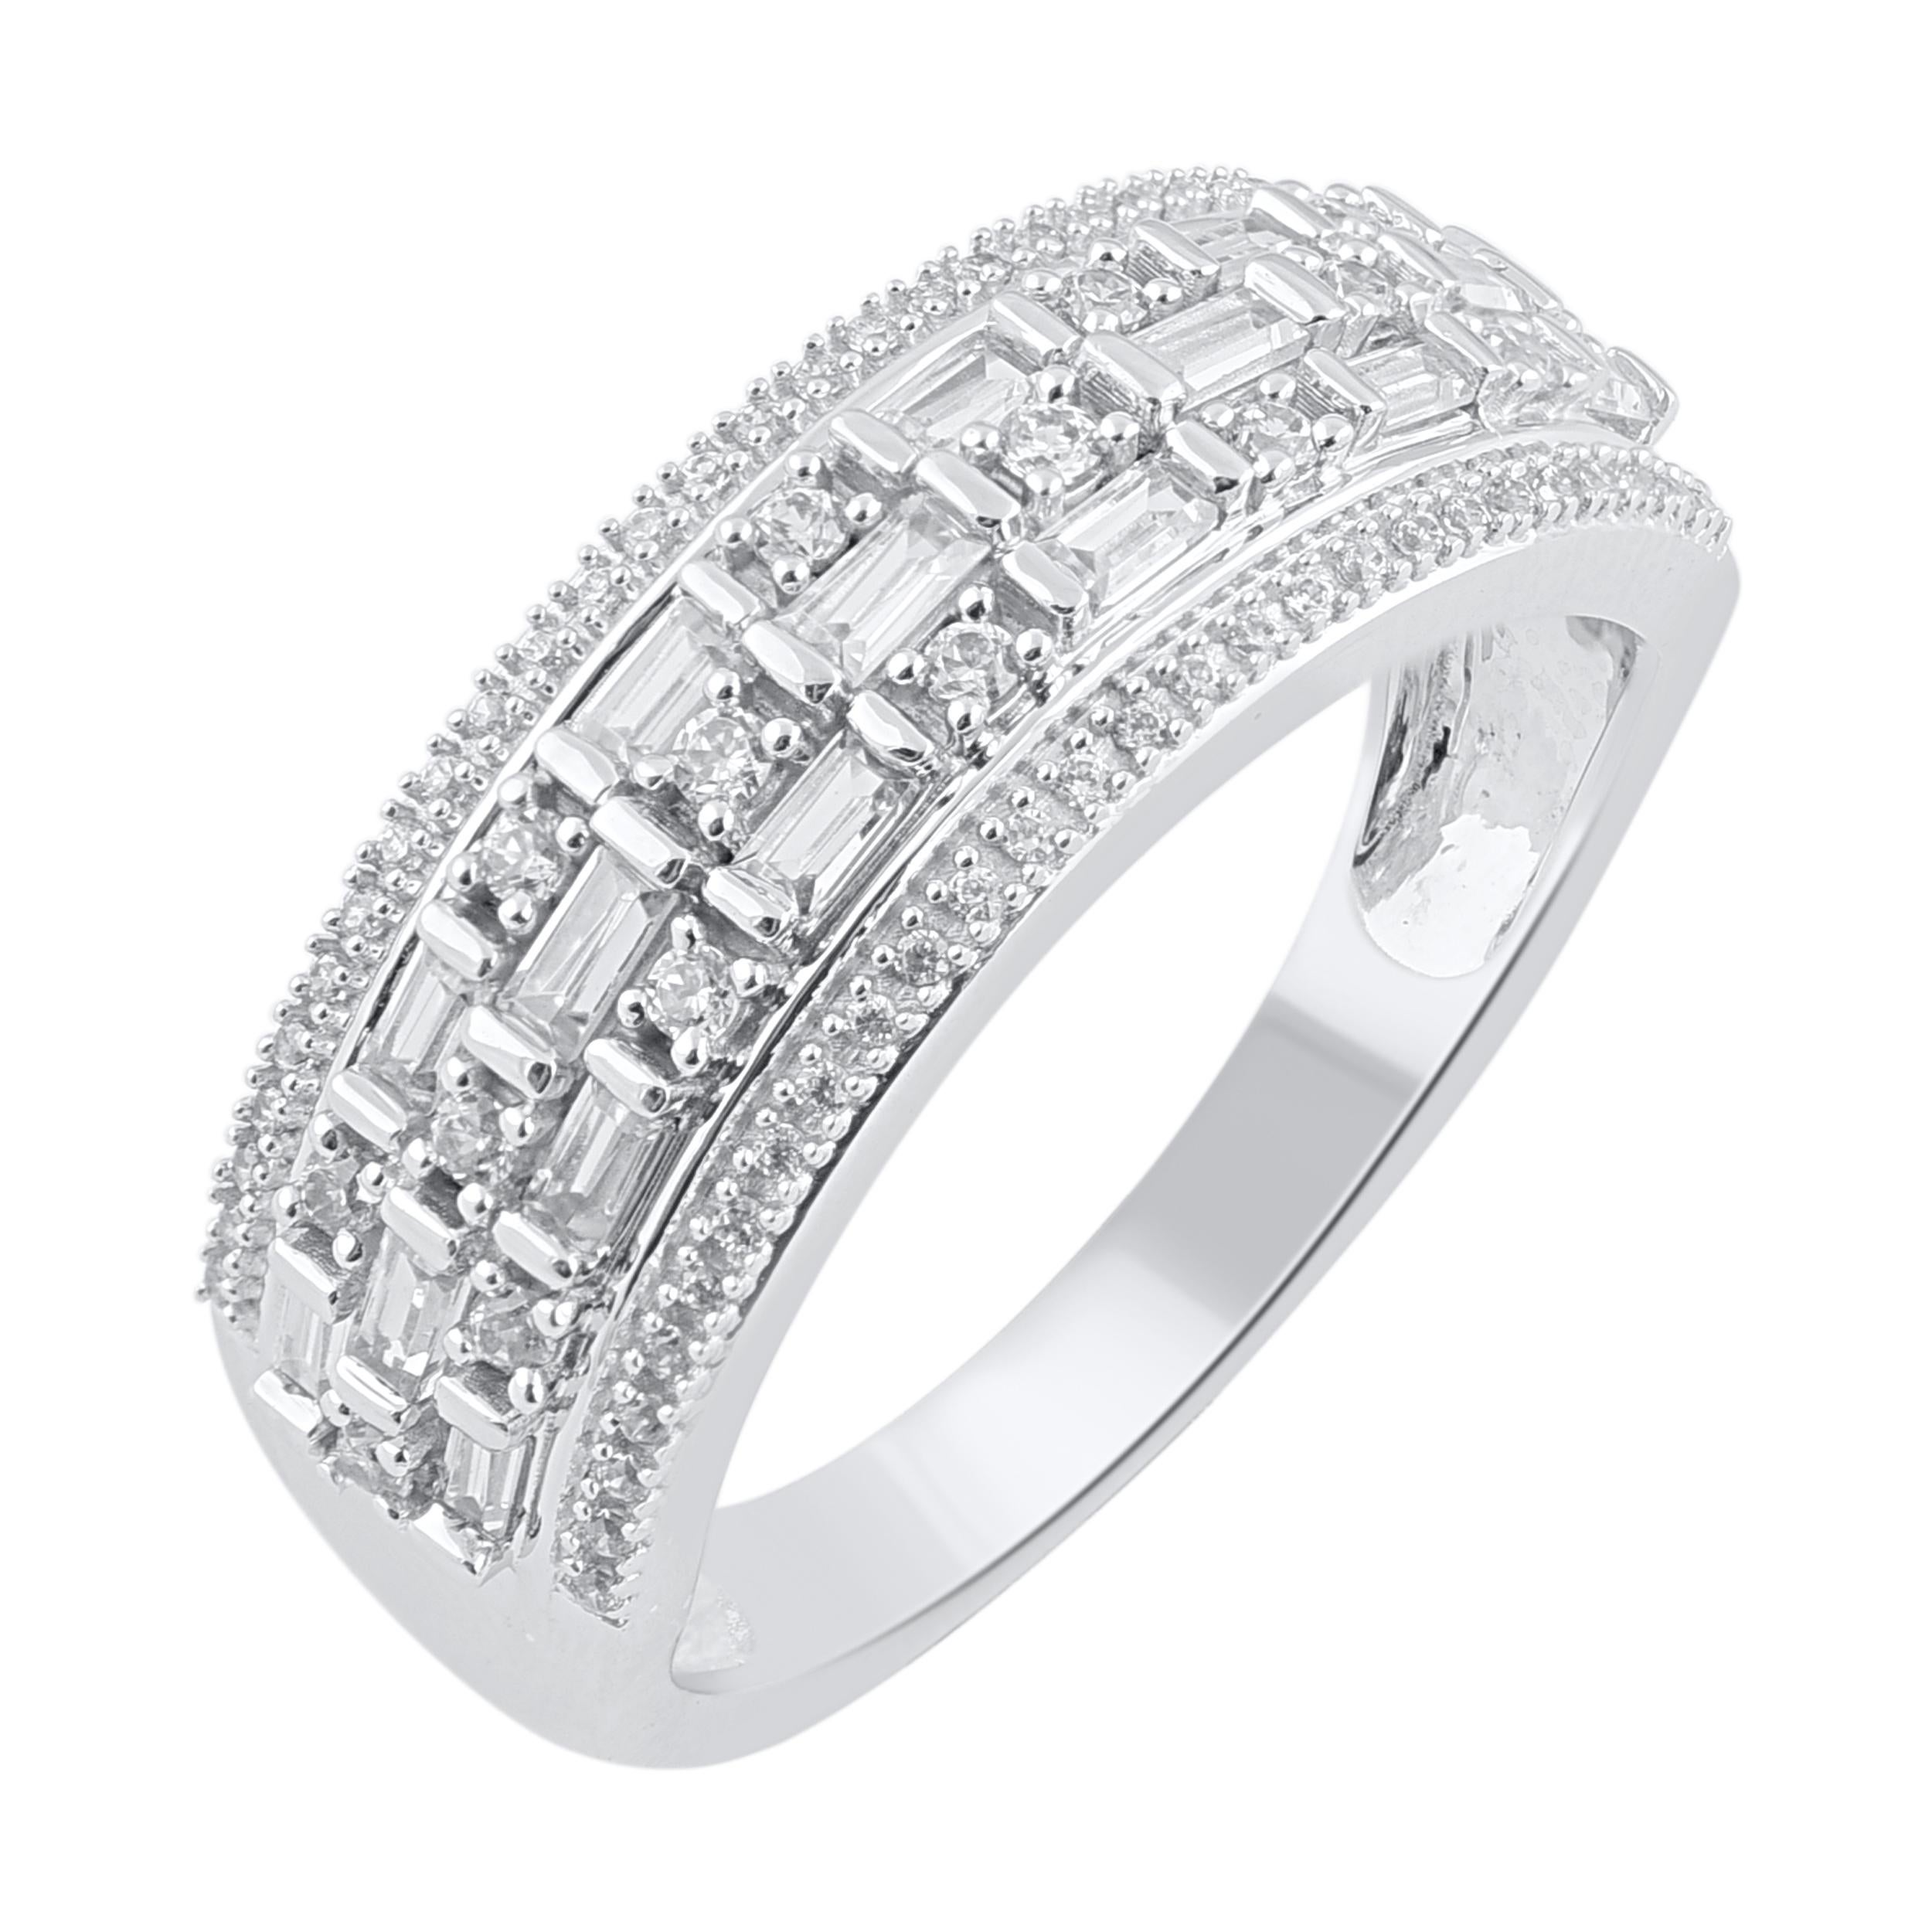 Make that special moment magical with the exquisite diamond engagement ring. This ring is beautifully crafted in 14 karat white gold and embedded with 87 brilliant, single cut round diamonds & baguette diamond set in prong & channel setting. The